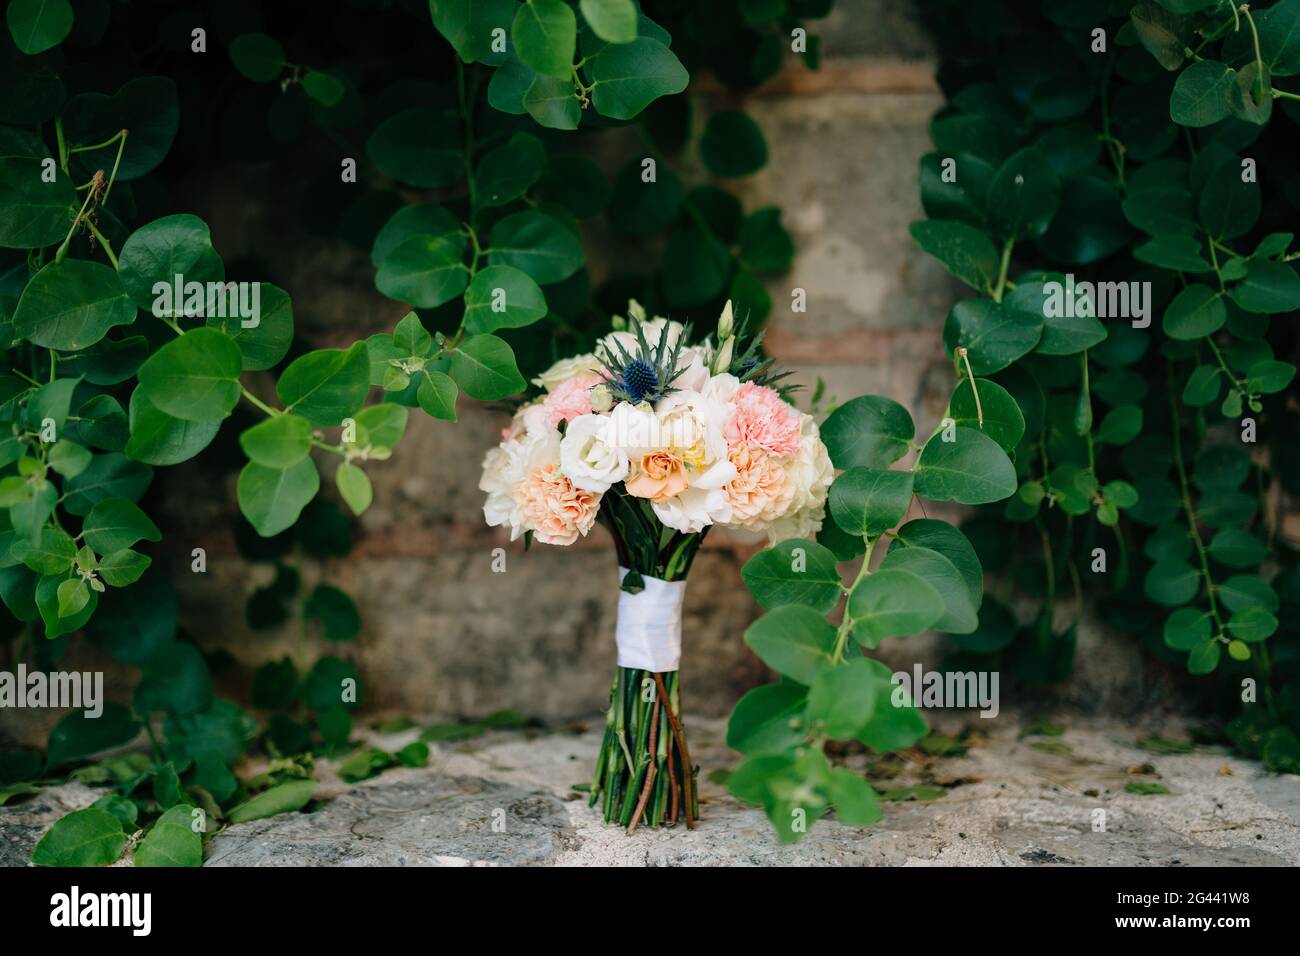 Bridal bouquet of white and pink peonies, eryngium and green buds, with white ribbons down on the stone near green branches Stock Photo